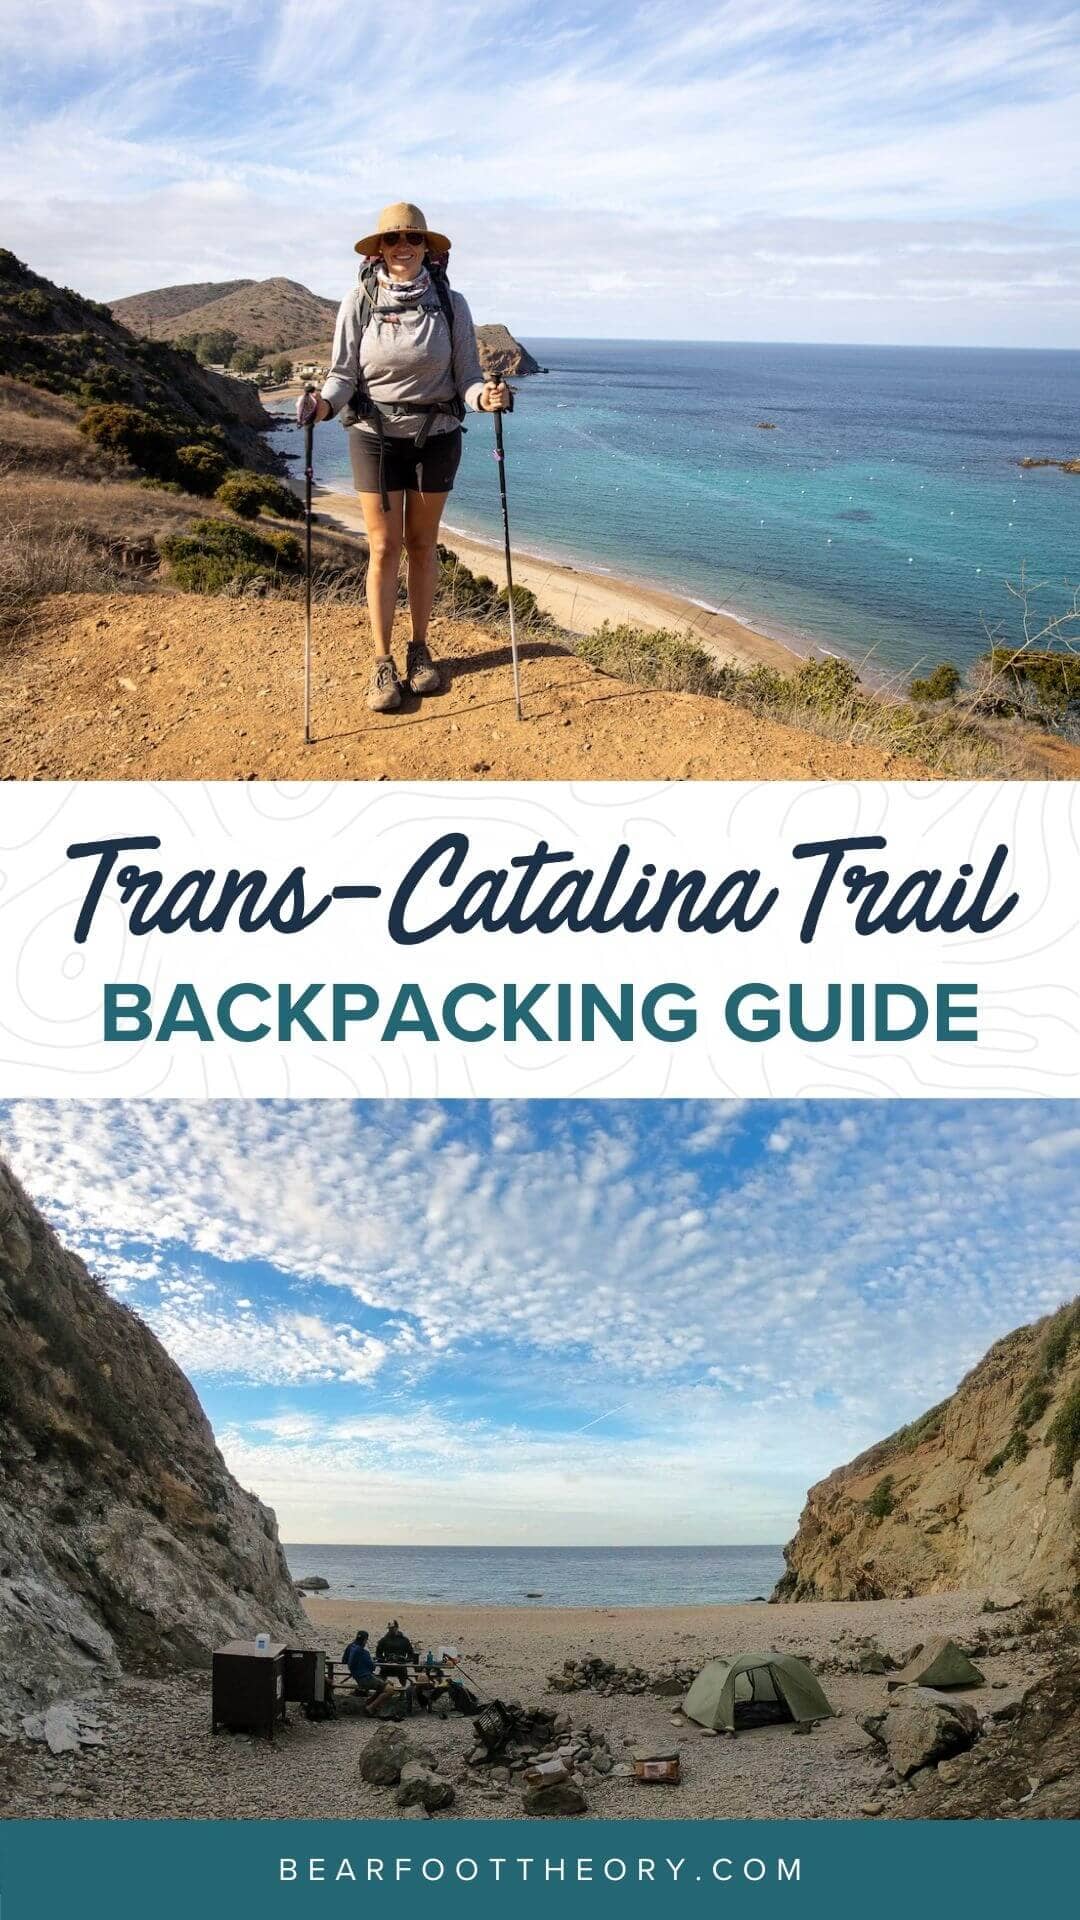 Plan a backpacking trip on California's Trans-Catalina Trail with this hiking guide including tips on the best campsites, gear & water.